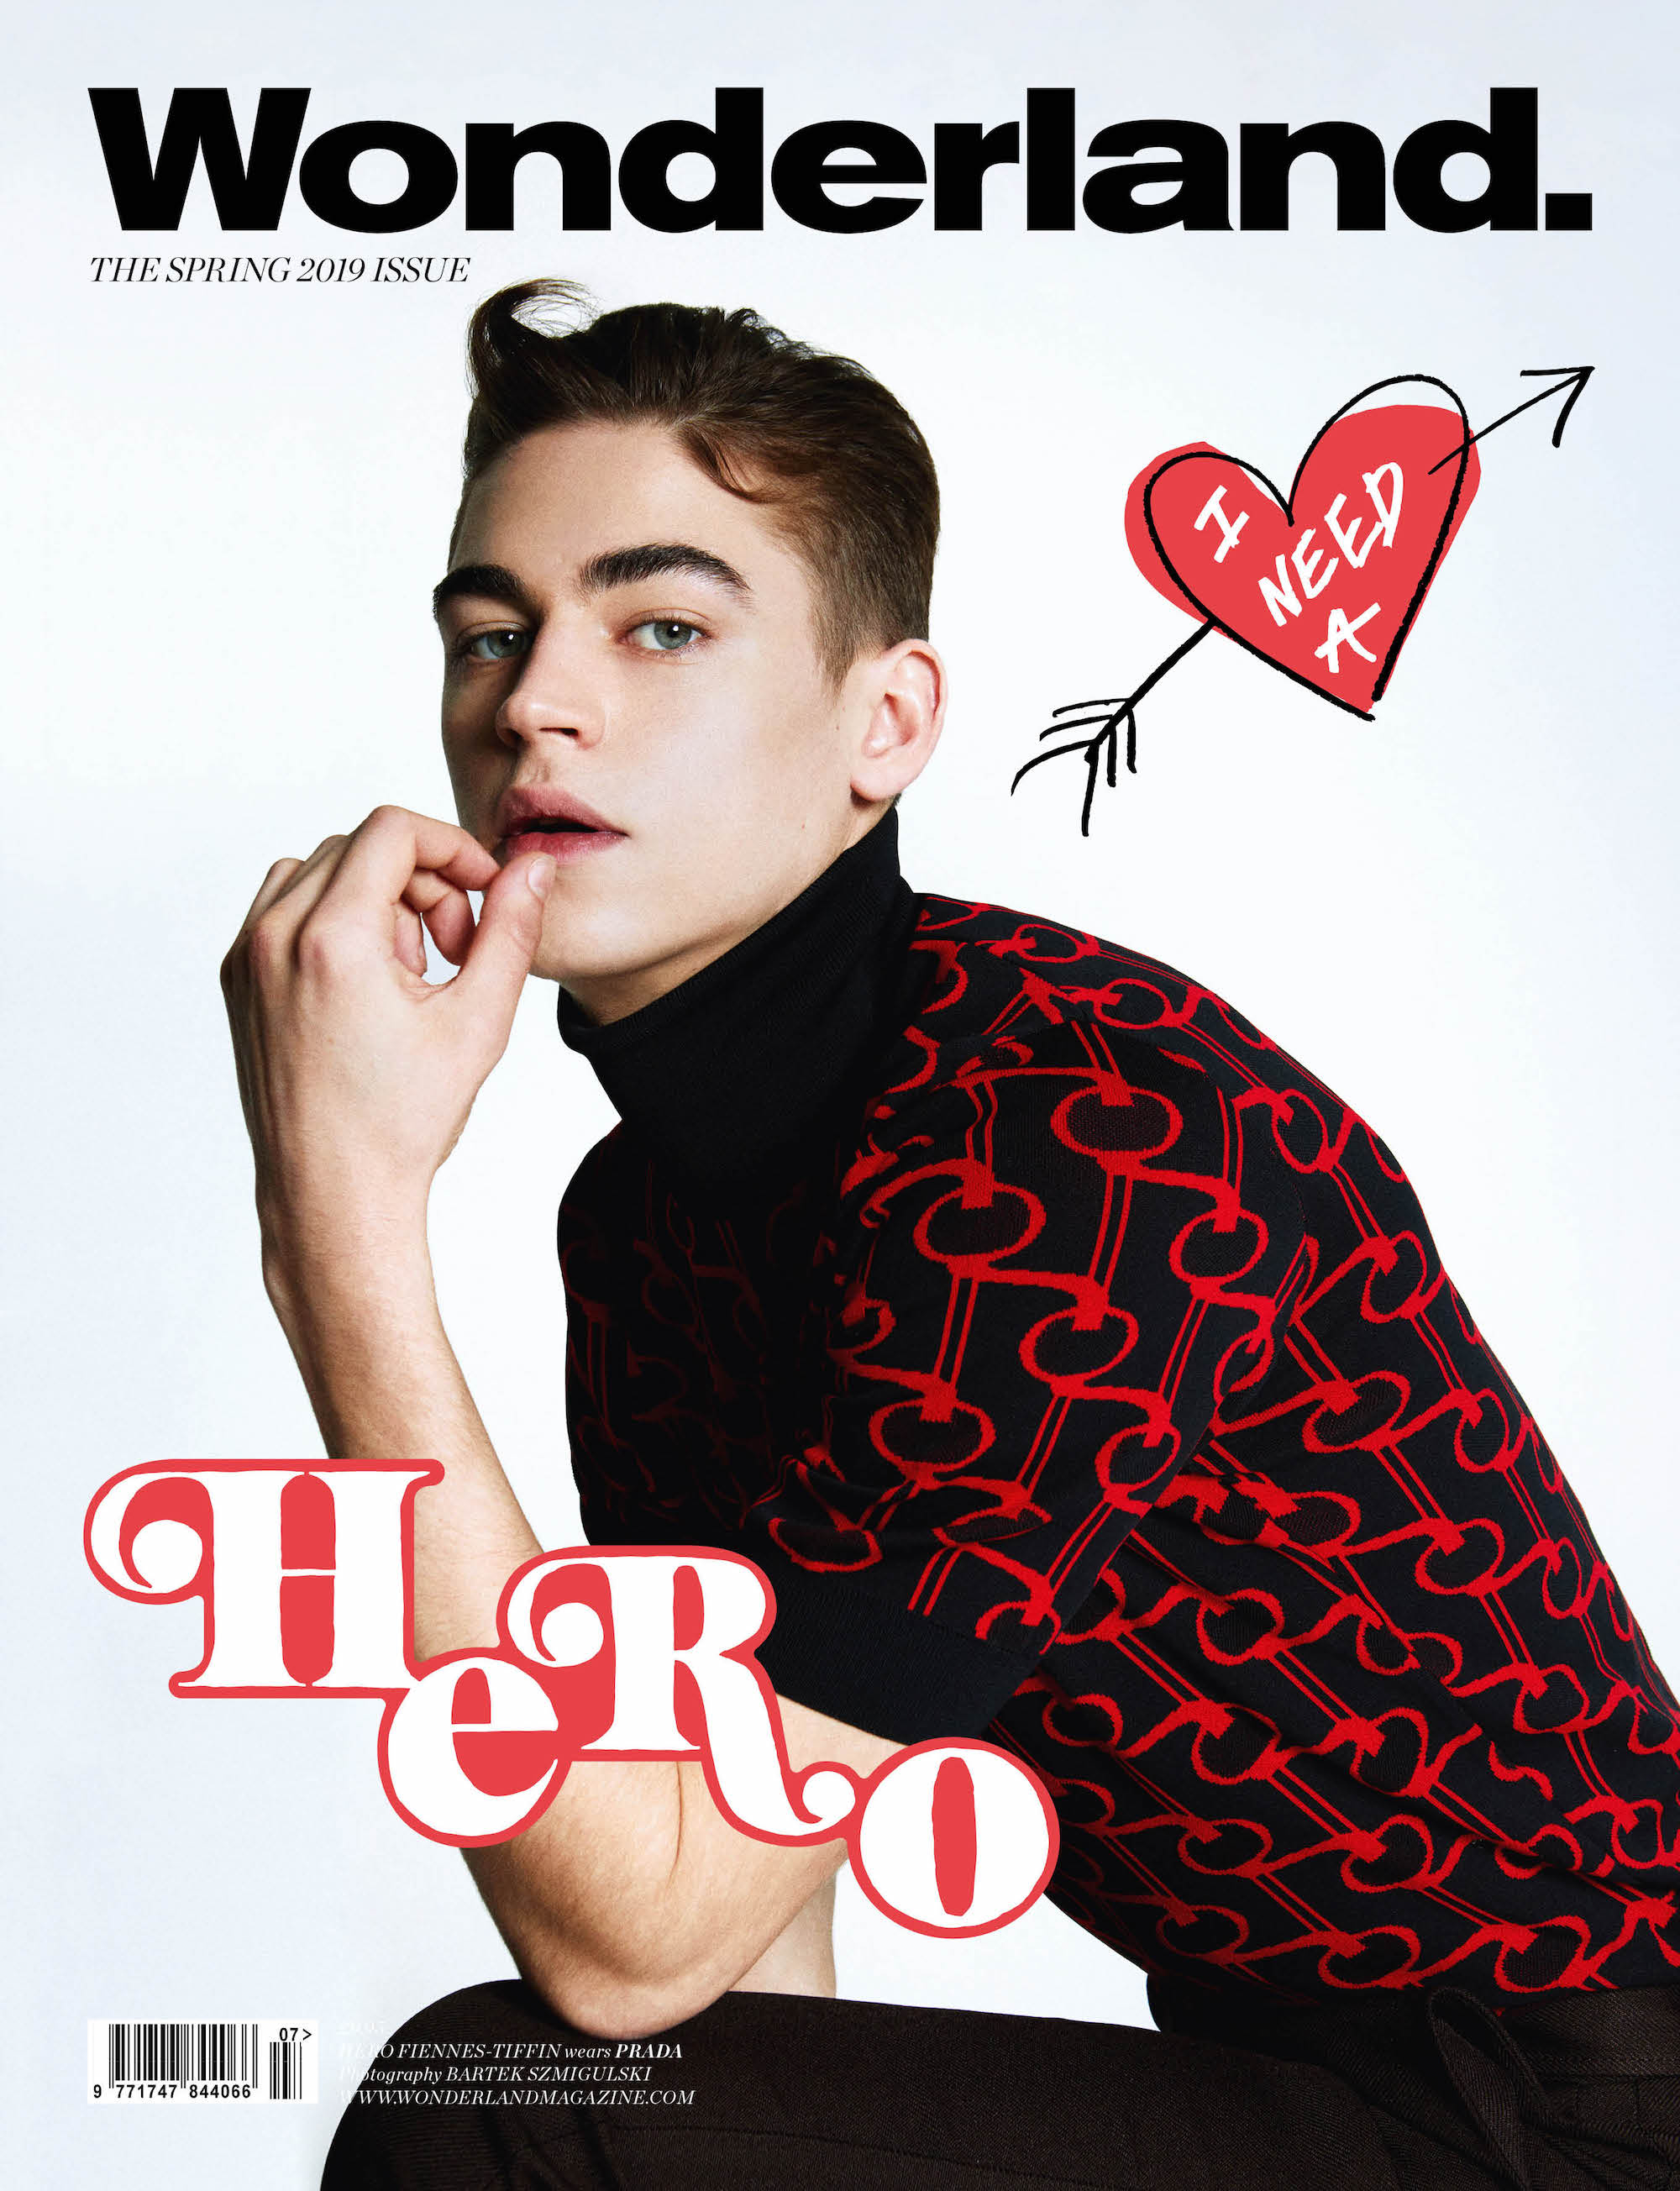 Who Is Hero Fiennes Tiffin? V Man